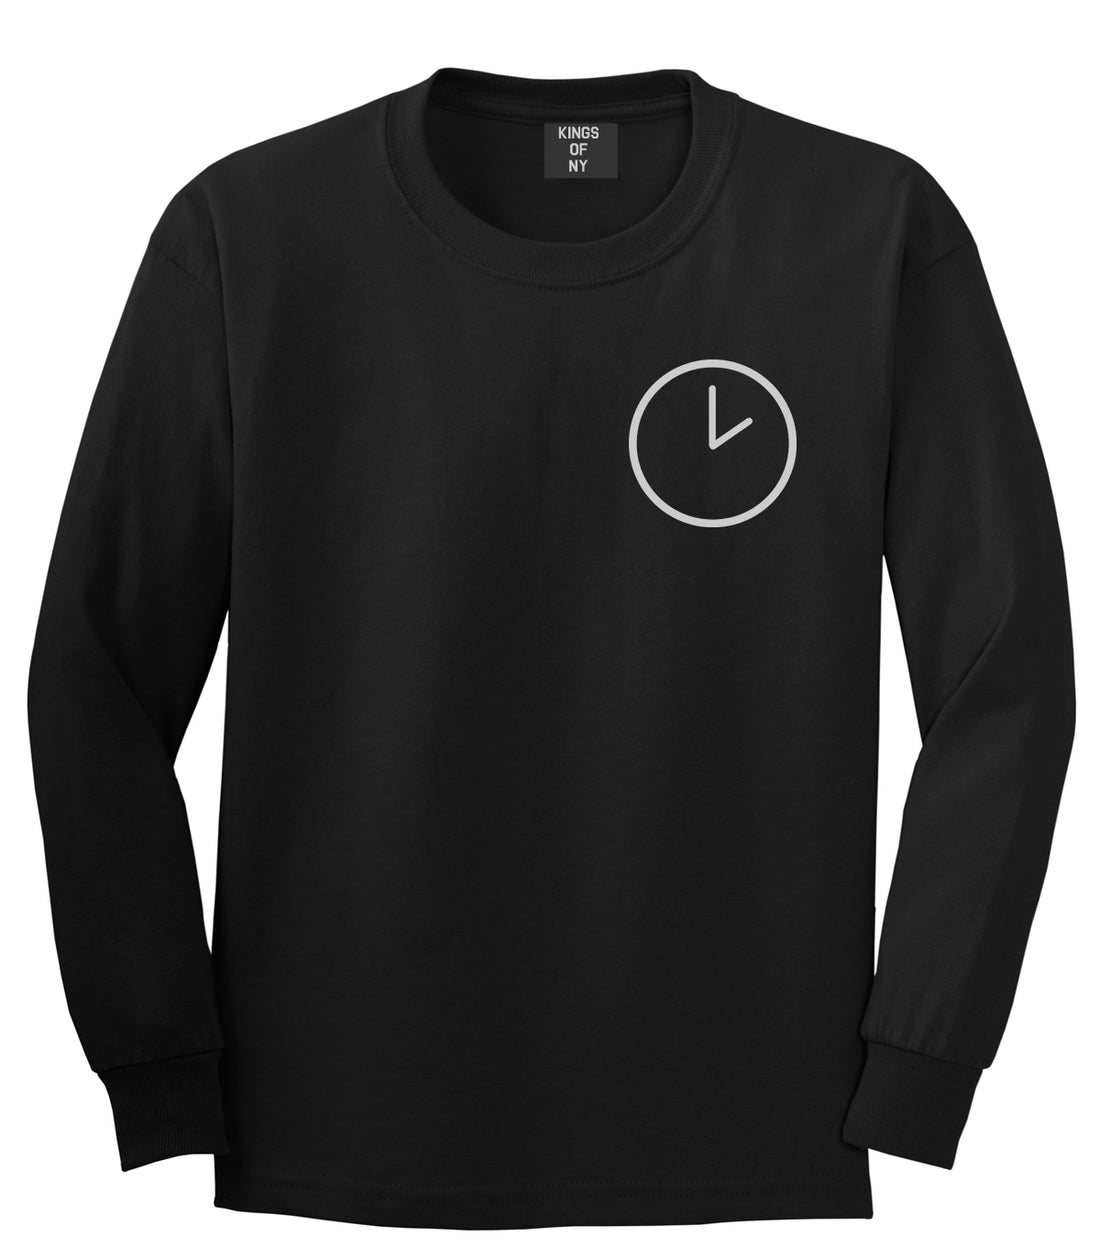 Clock Chest Black Long Sleeve T-Shirt by Kings Of NY